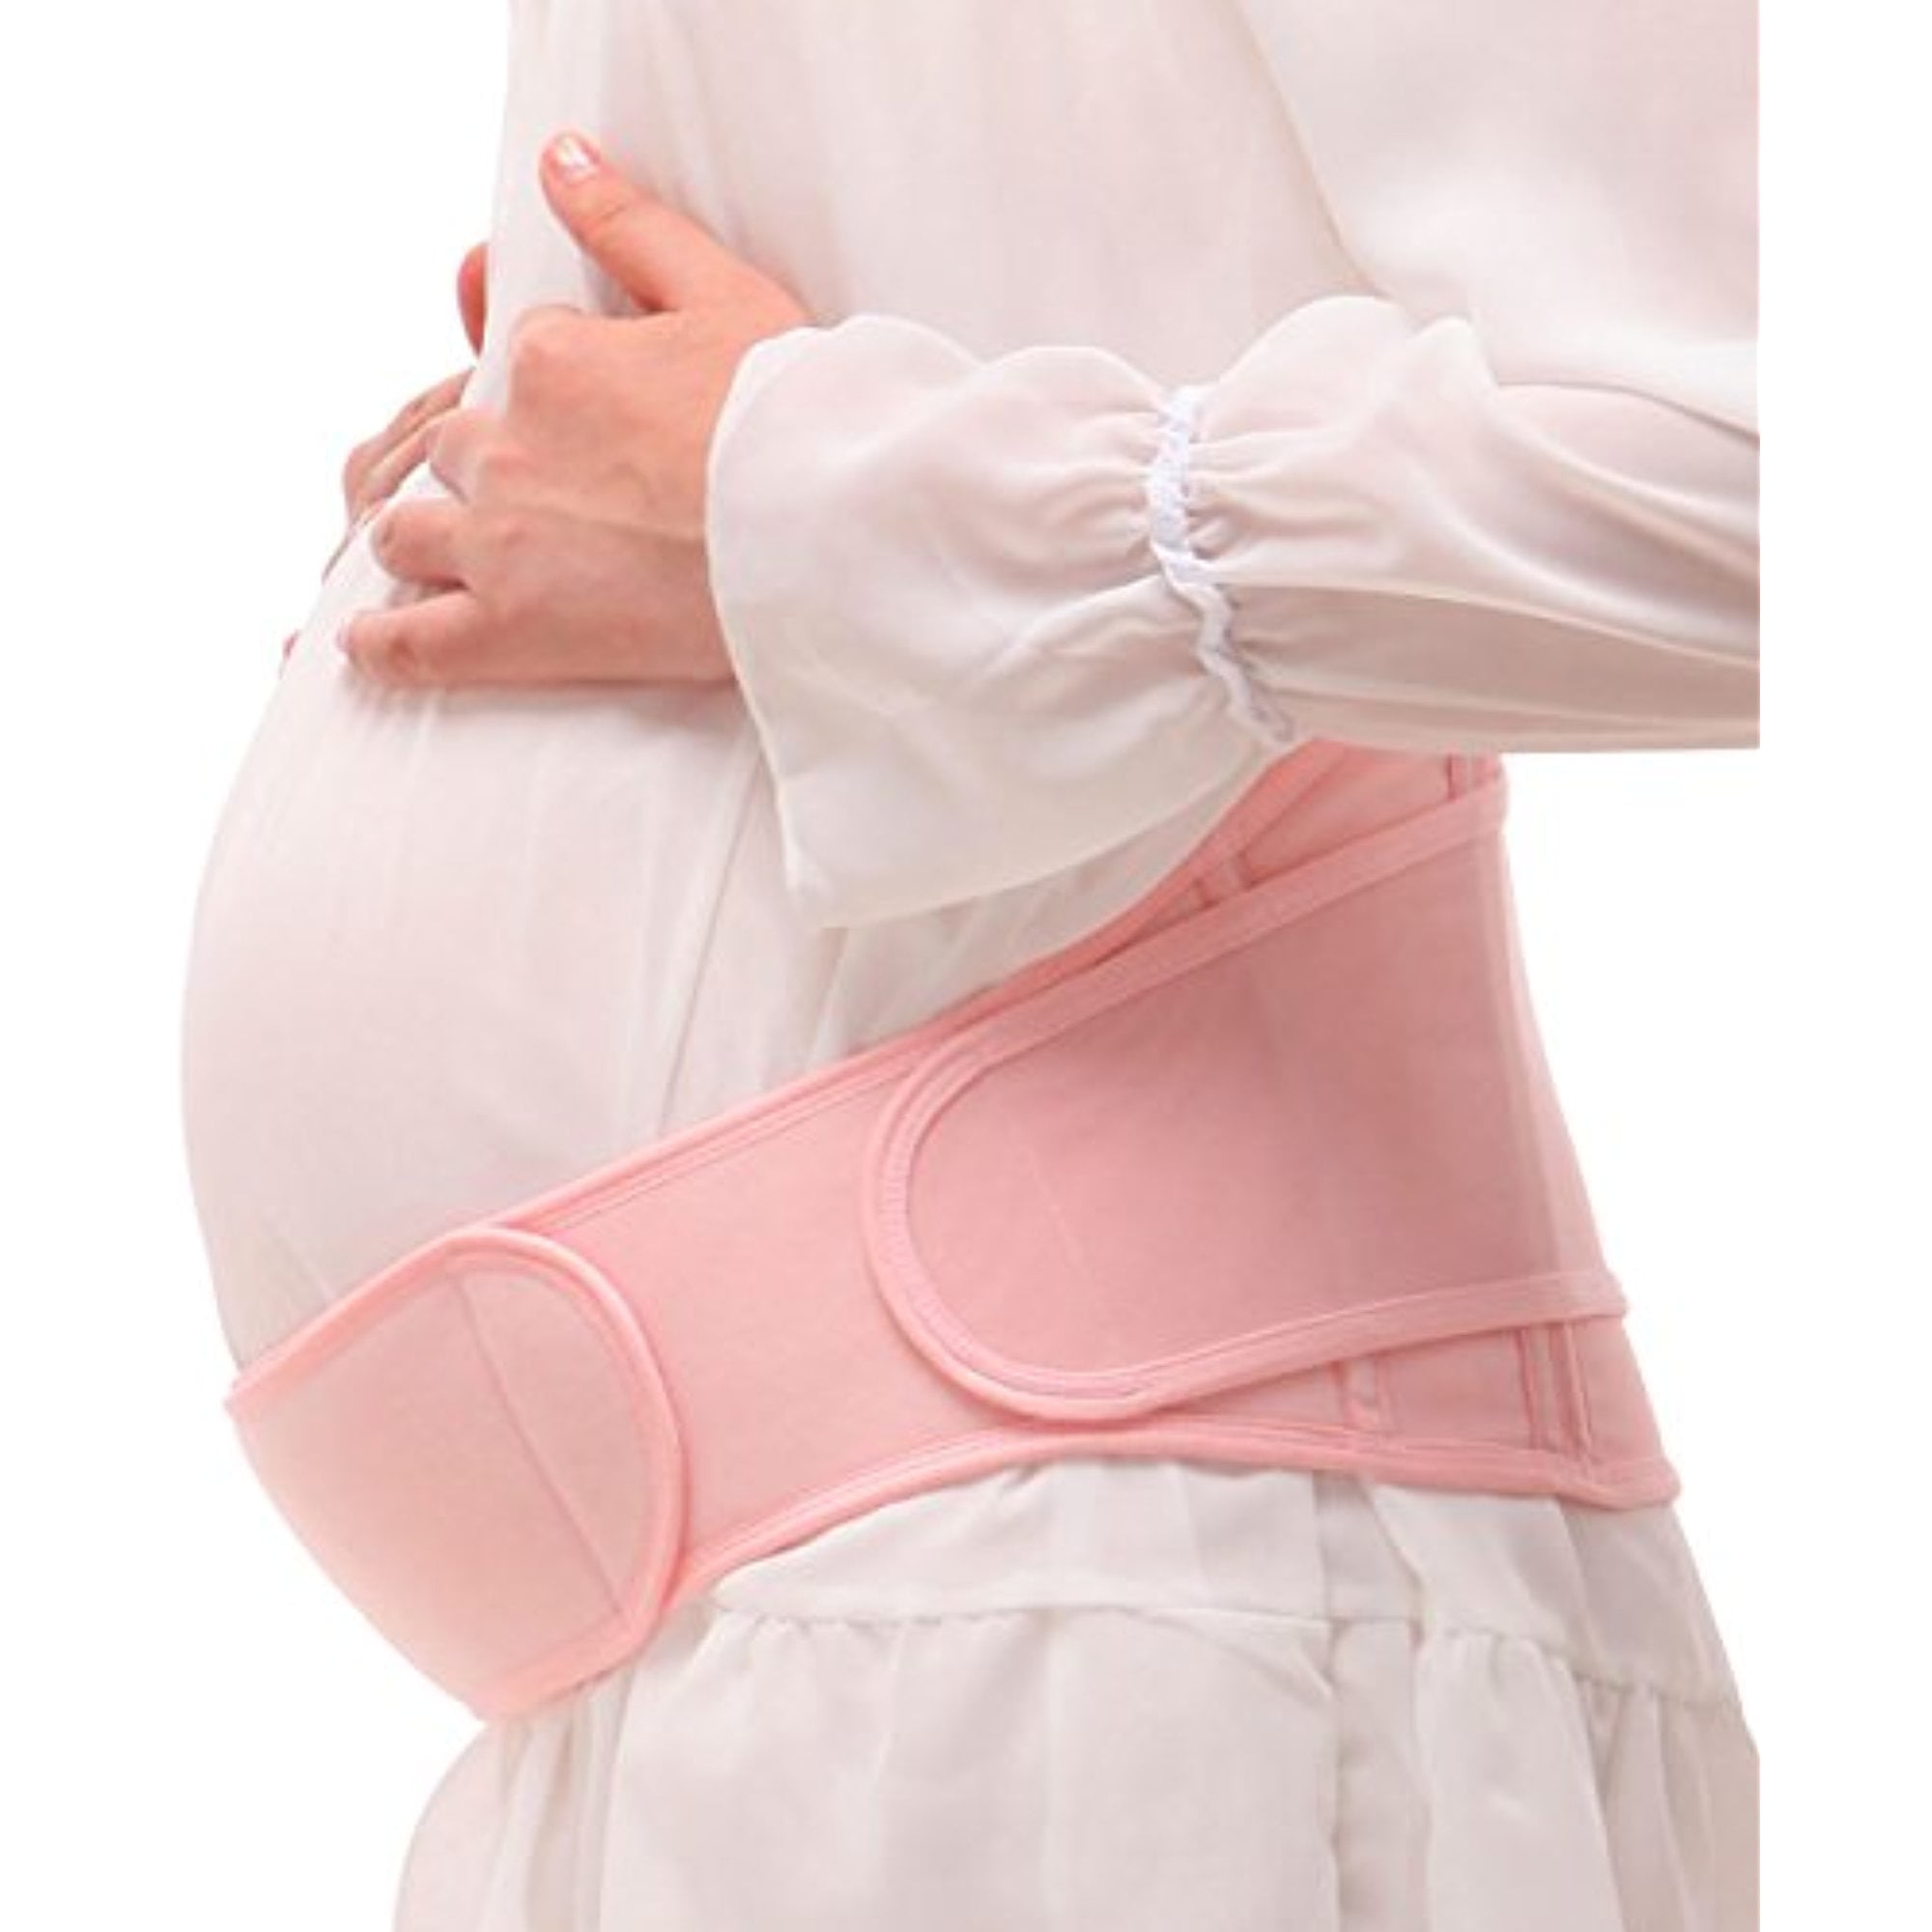 Maternity Pregnant Support  Band Belt Waist Lumbar Lower Belly Protect Strap CY2 